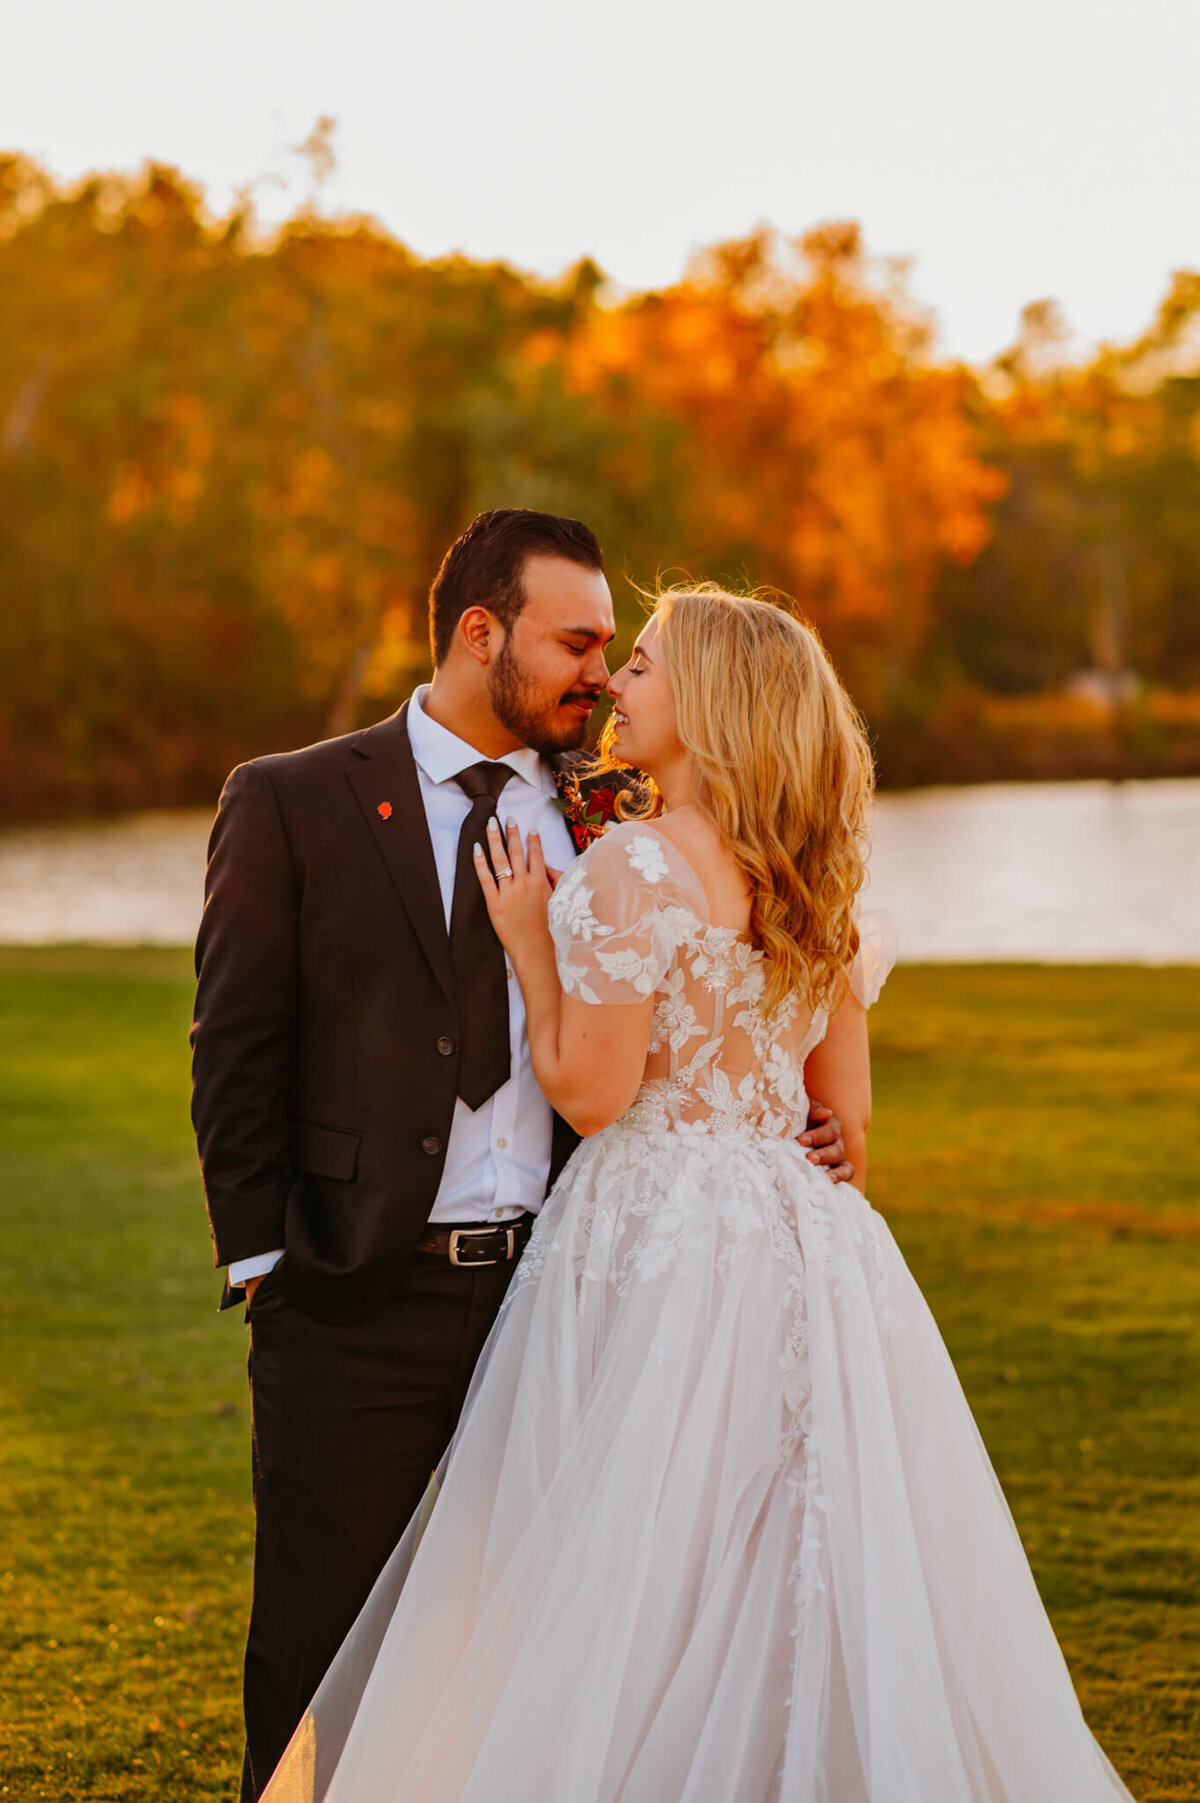 photo of a bride and groom rubbing their noses together with a pond, fall foliage, and the sun in the background